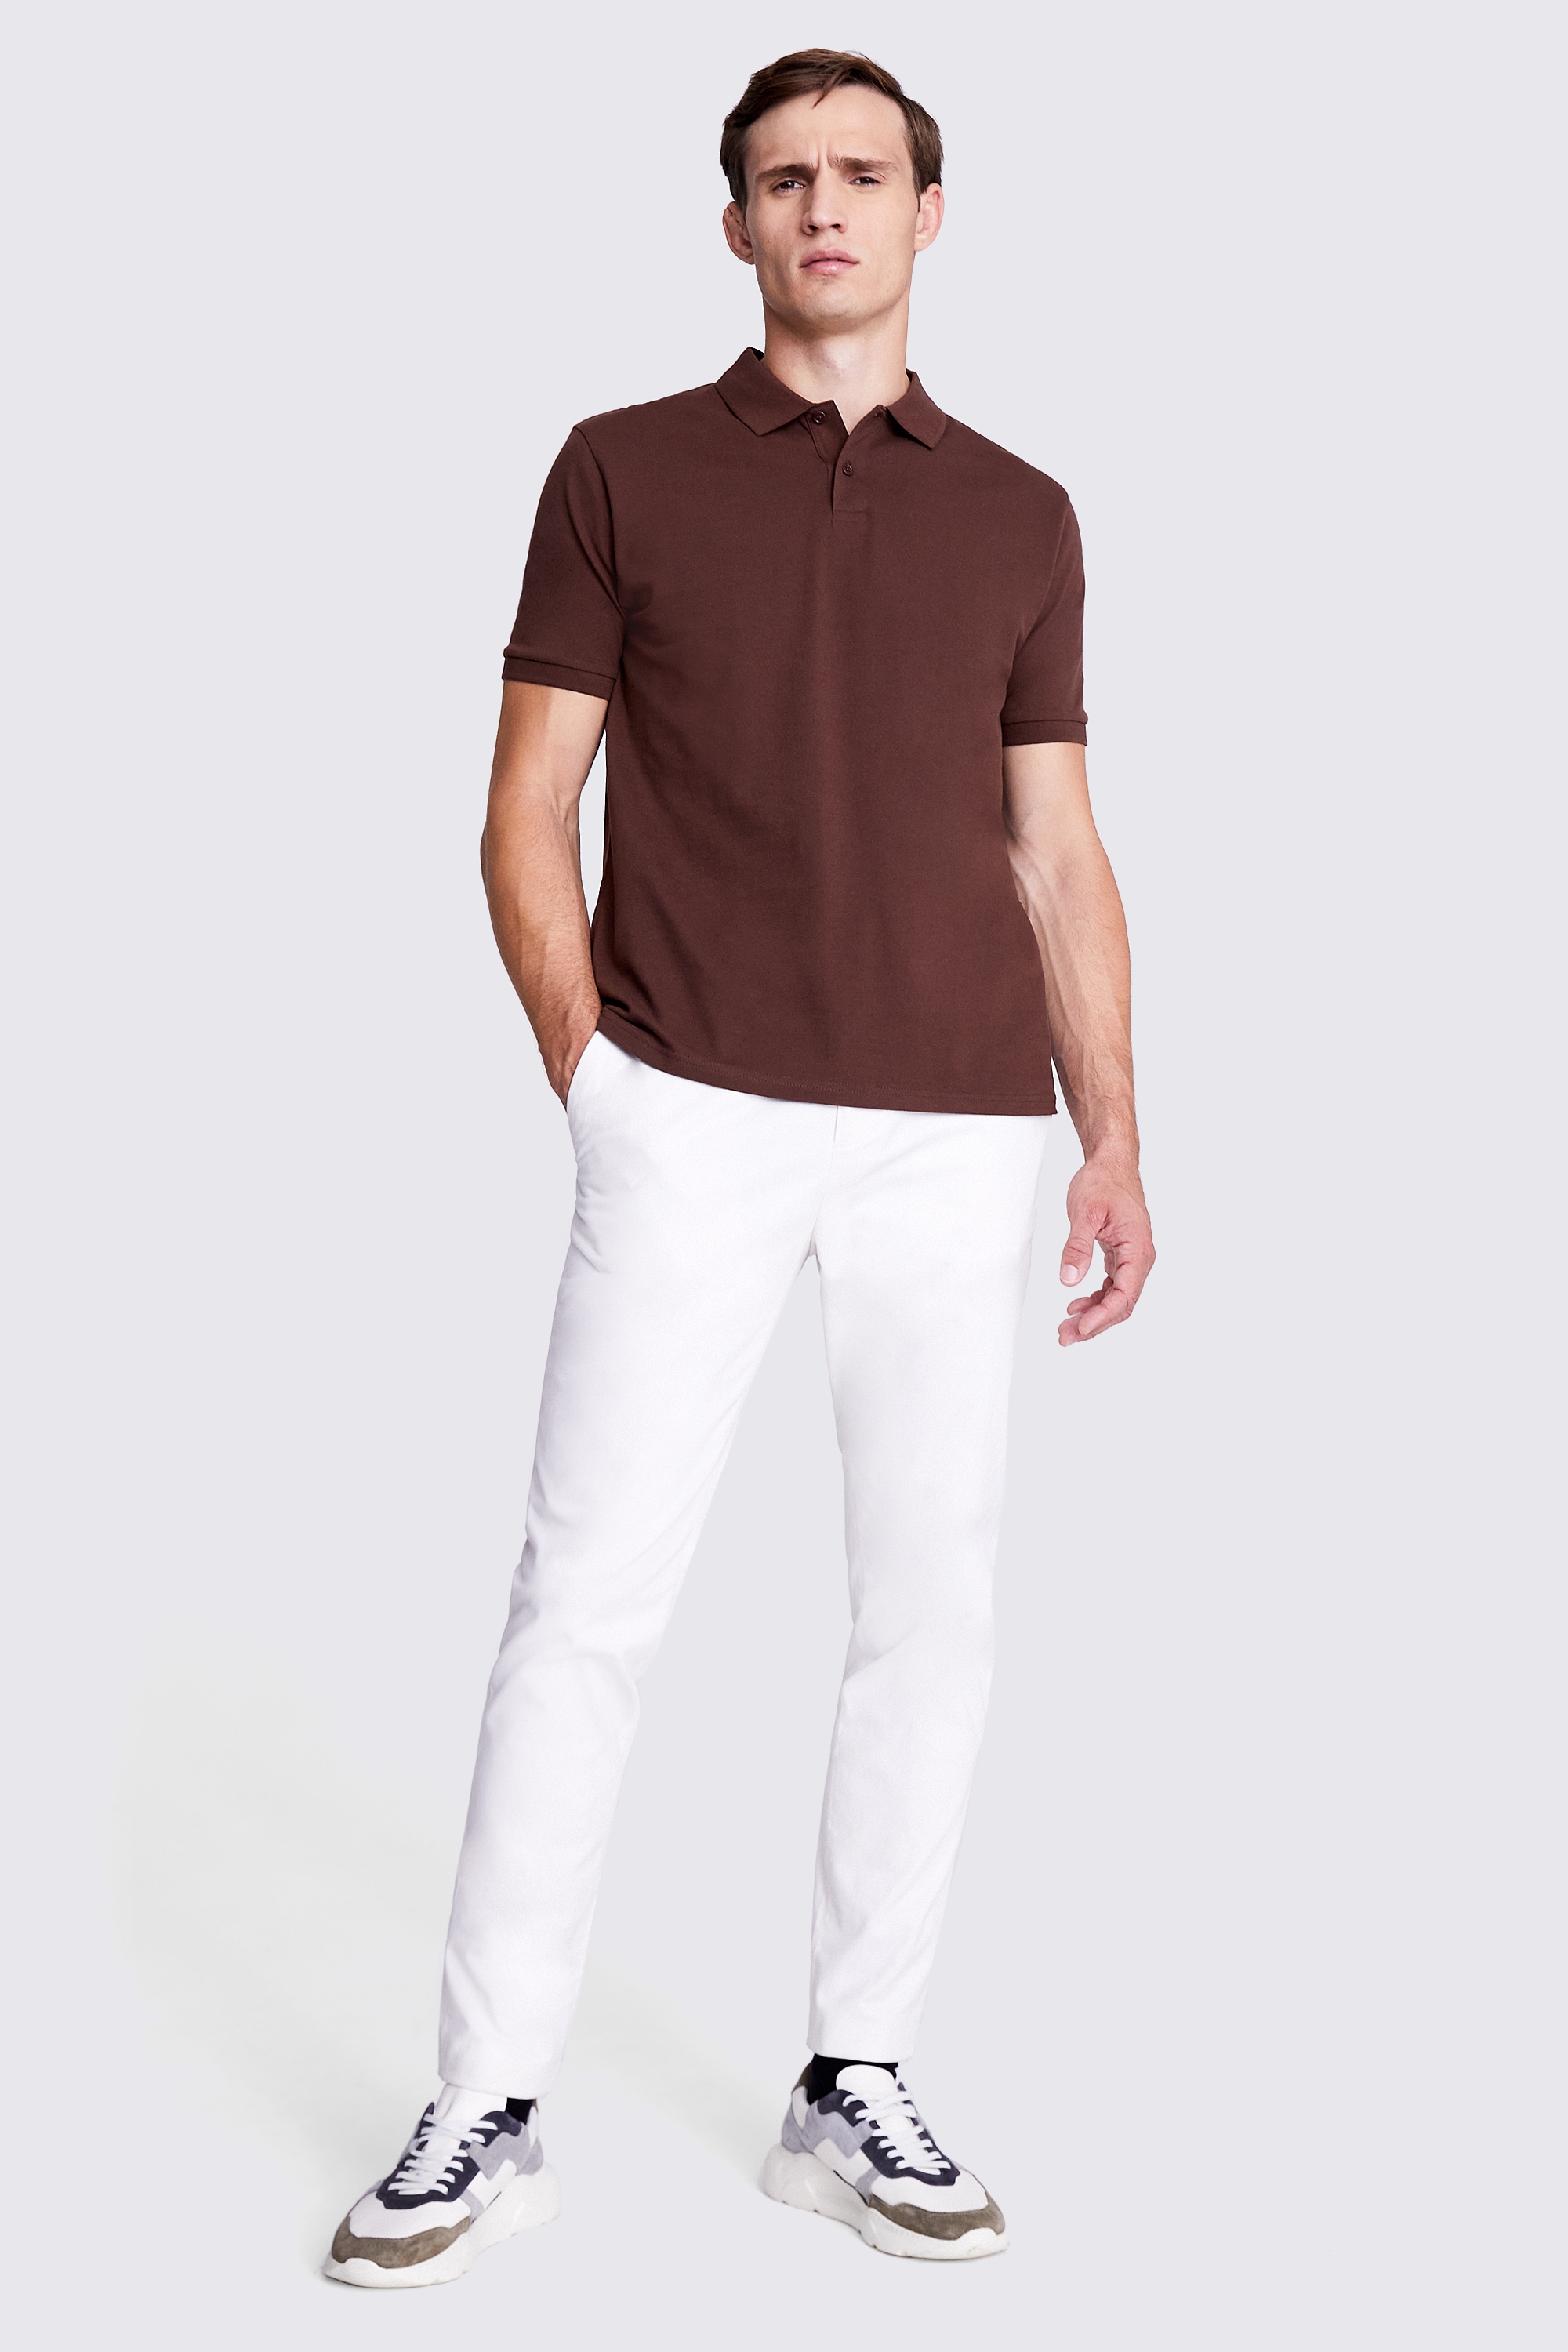 Brown Pique Polo Shirt | Buy Online at Moss